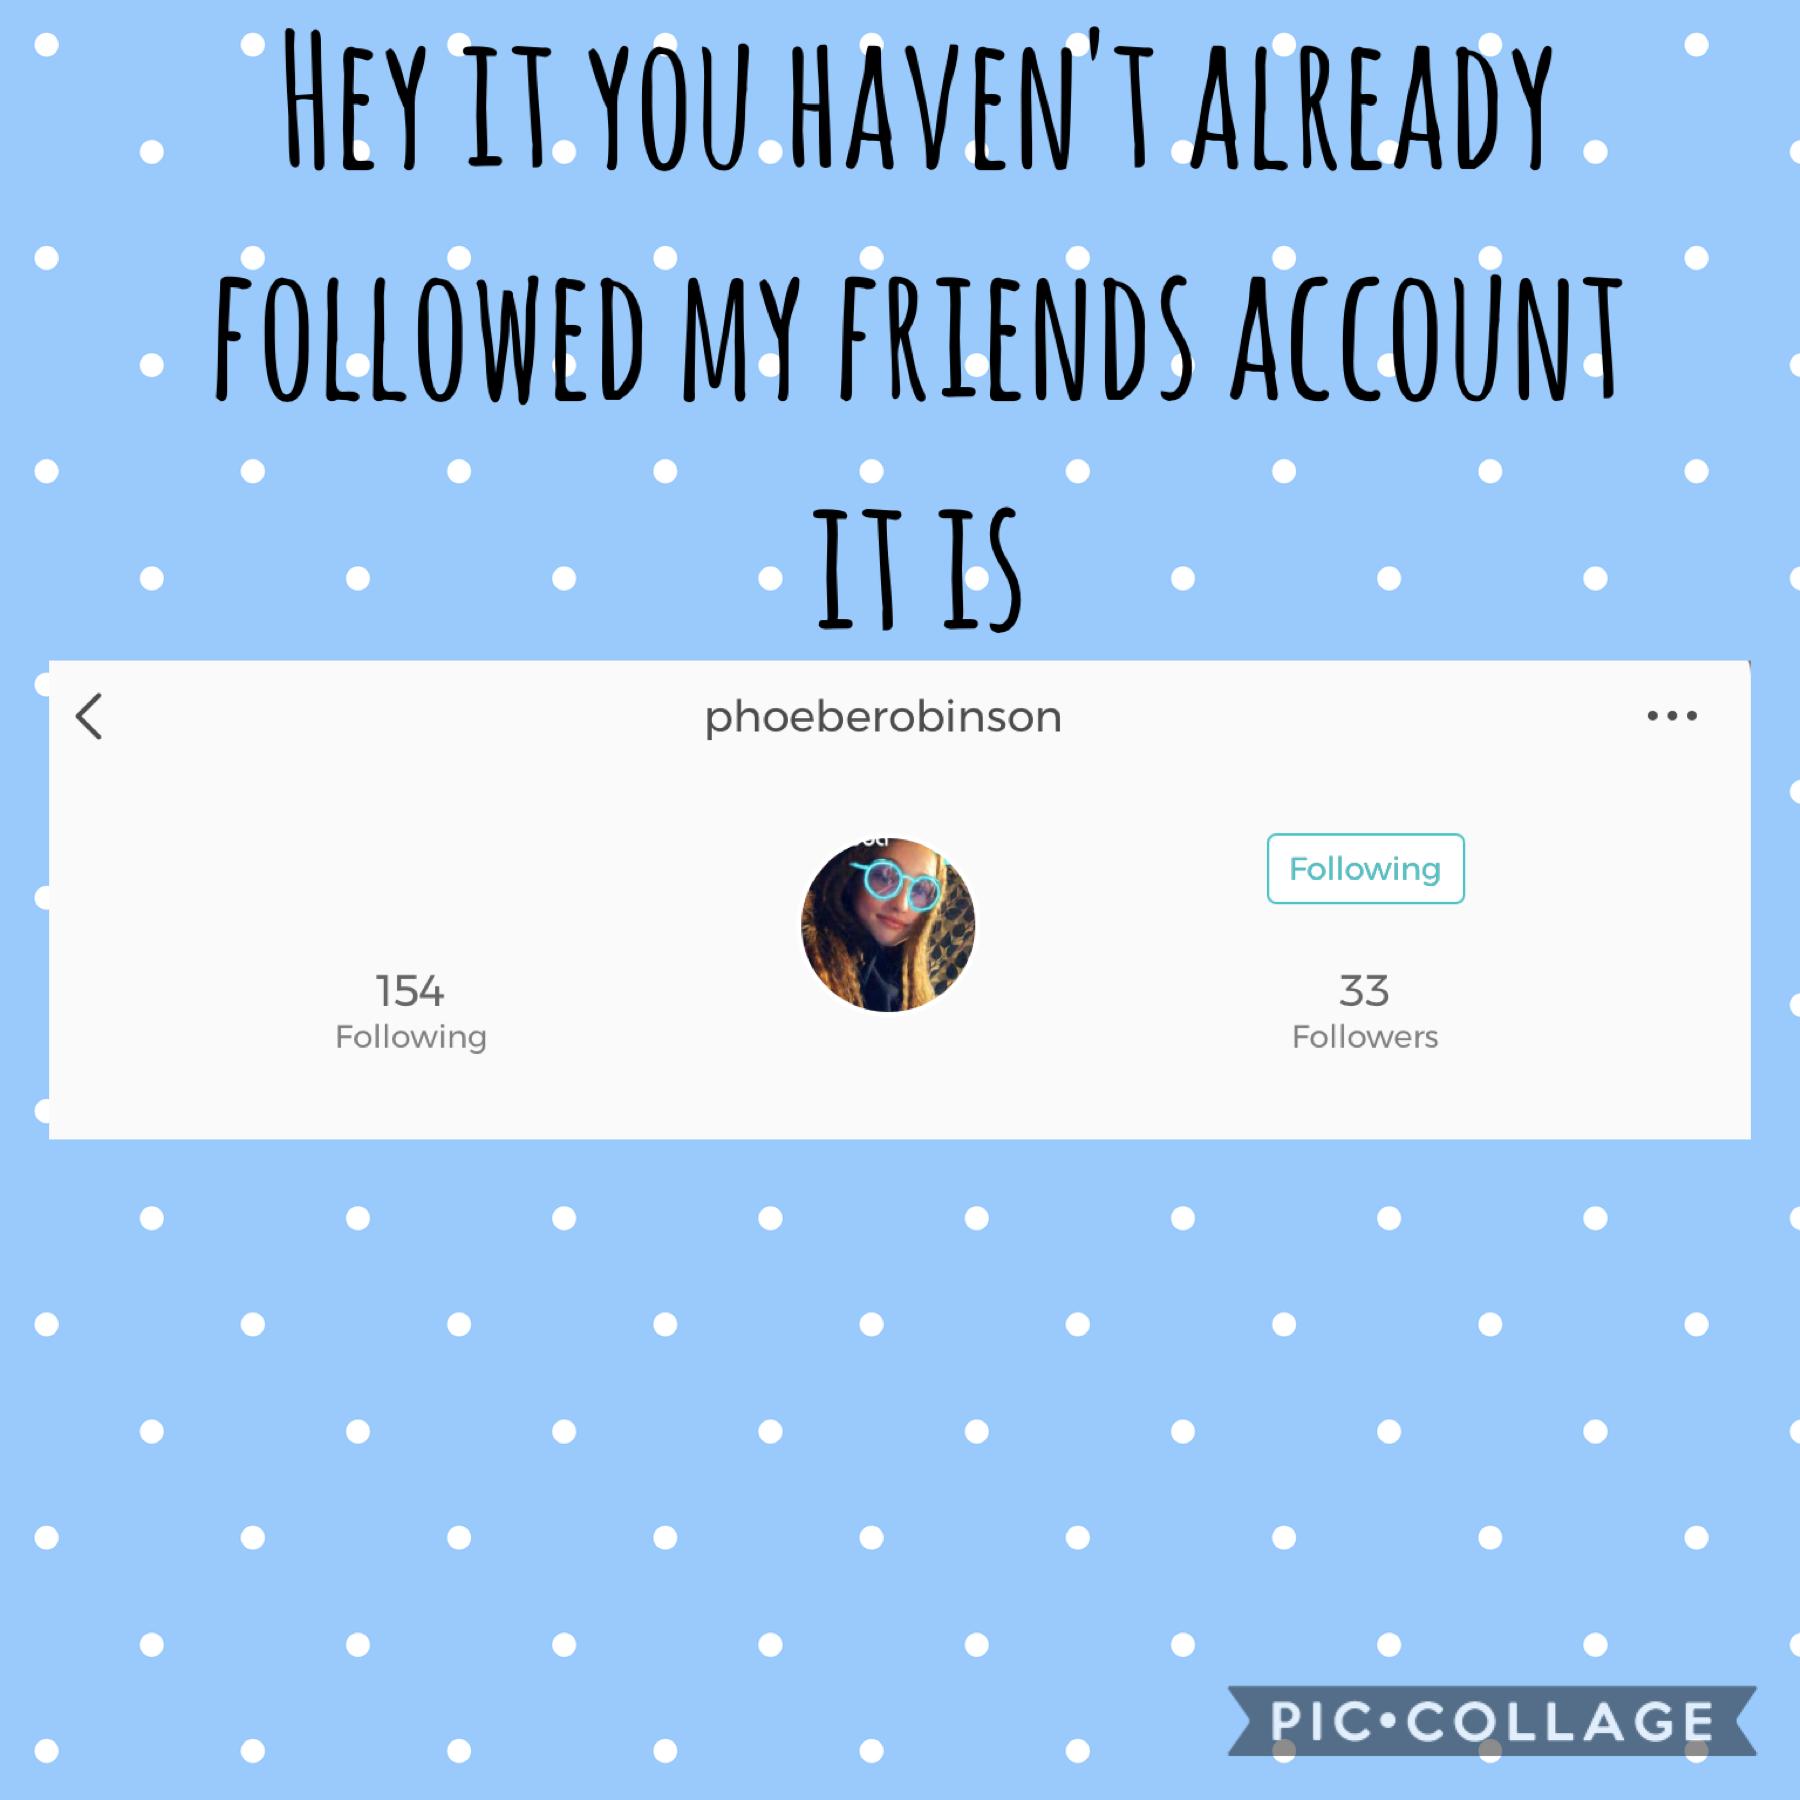 Make sure you follow her.